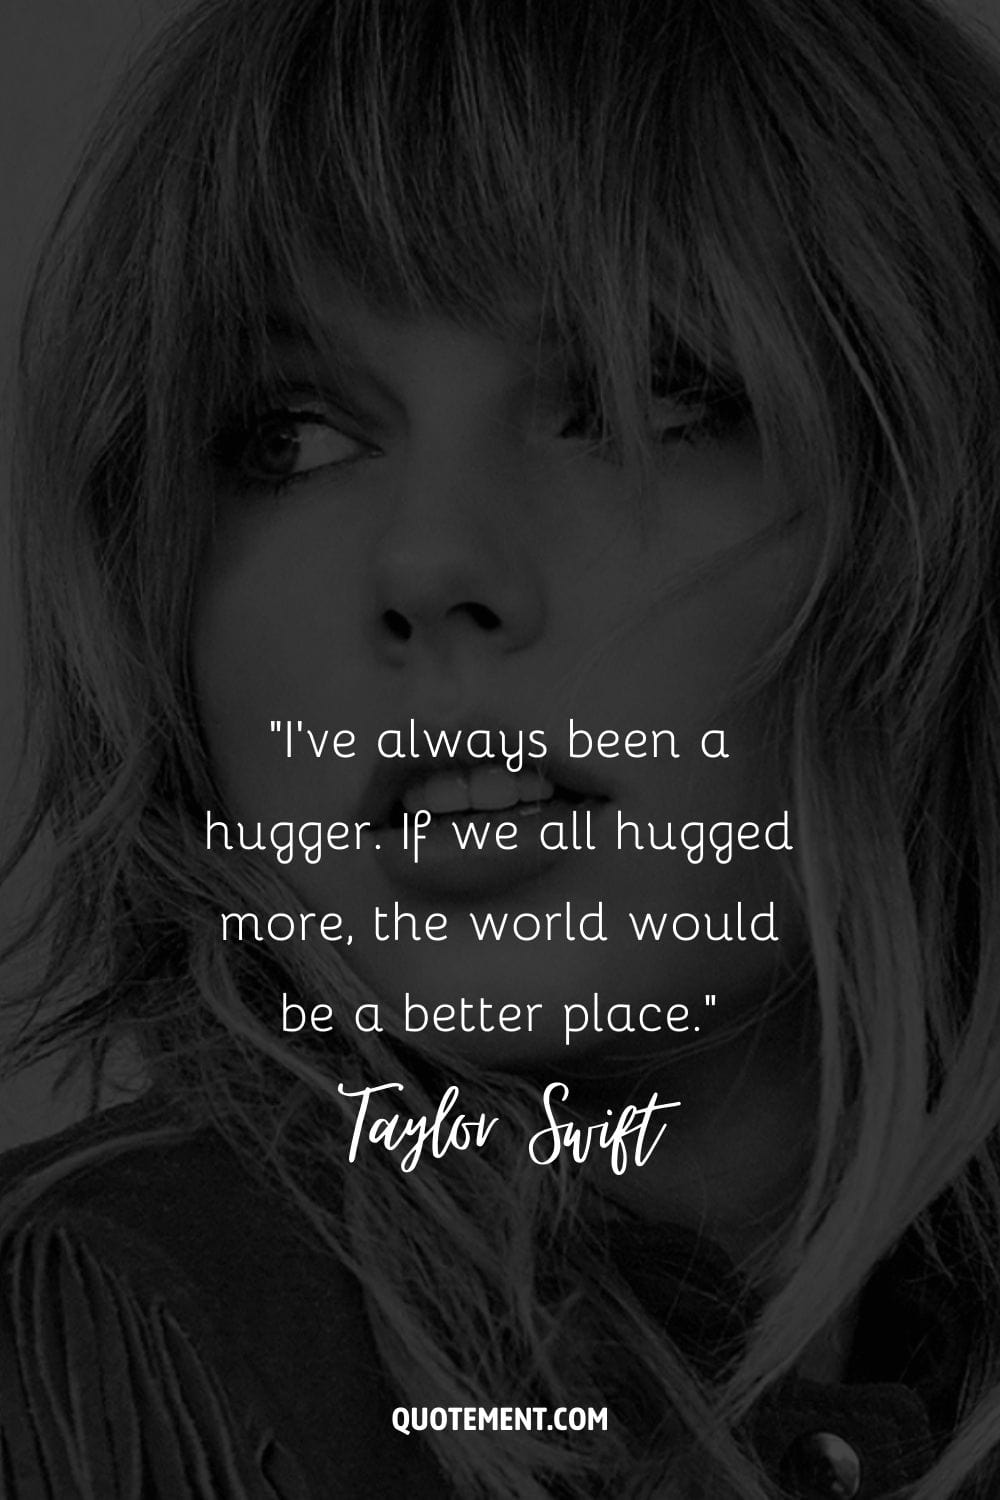 “I've always been a hugger. If we all hugged more, the world would be a better place.” ― Taylor Swift